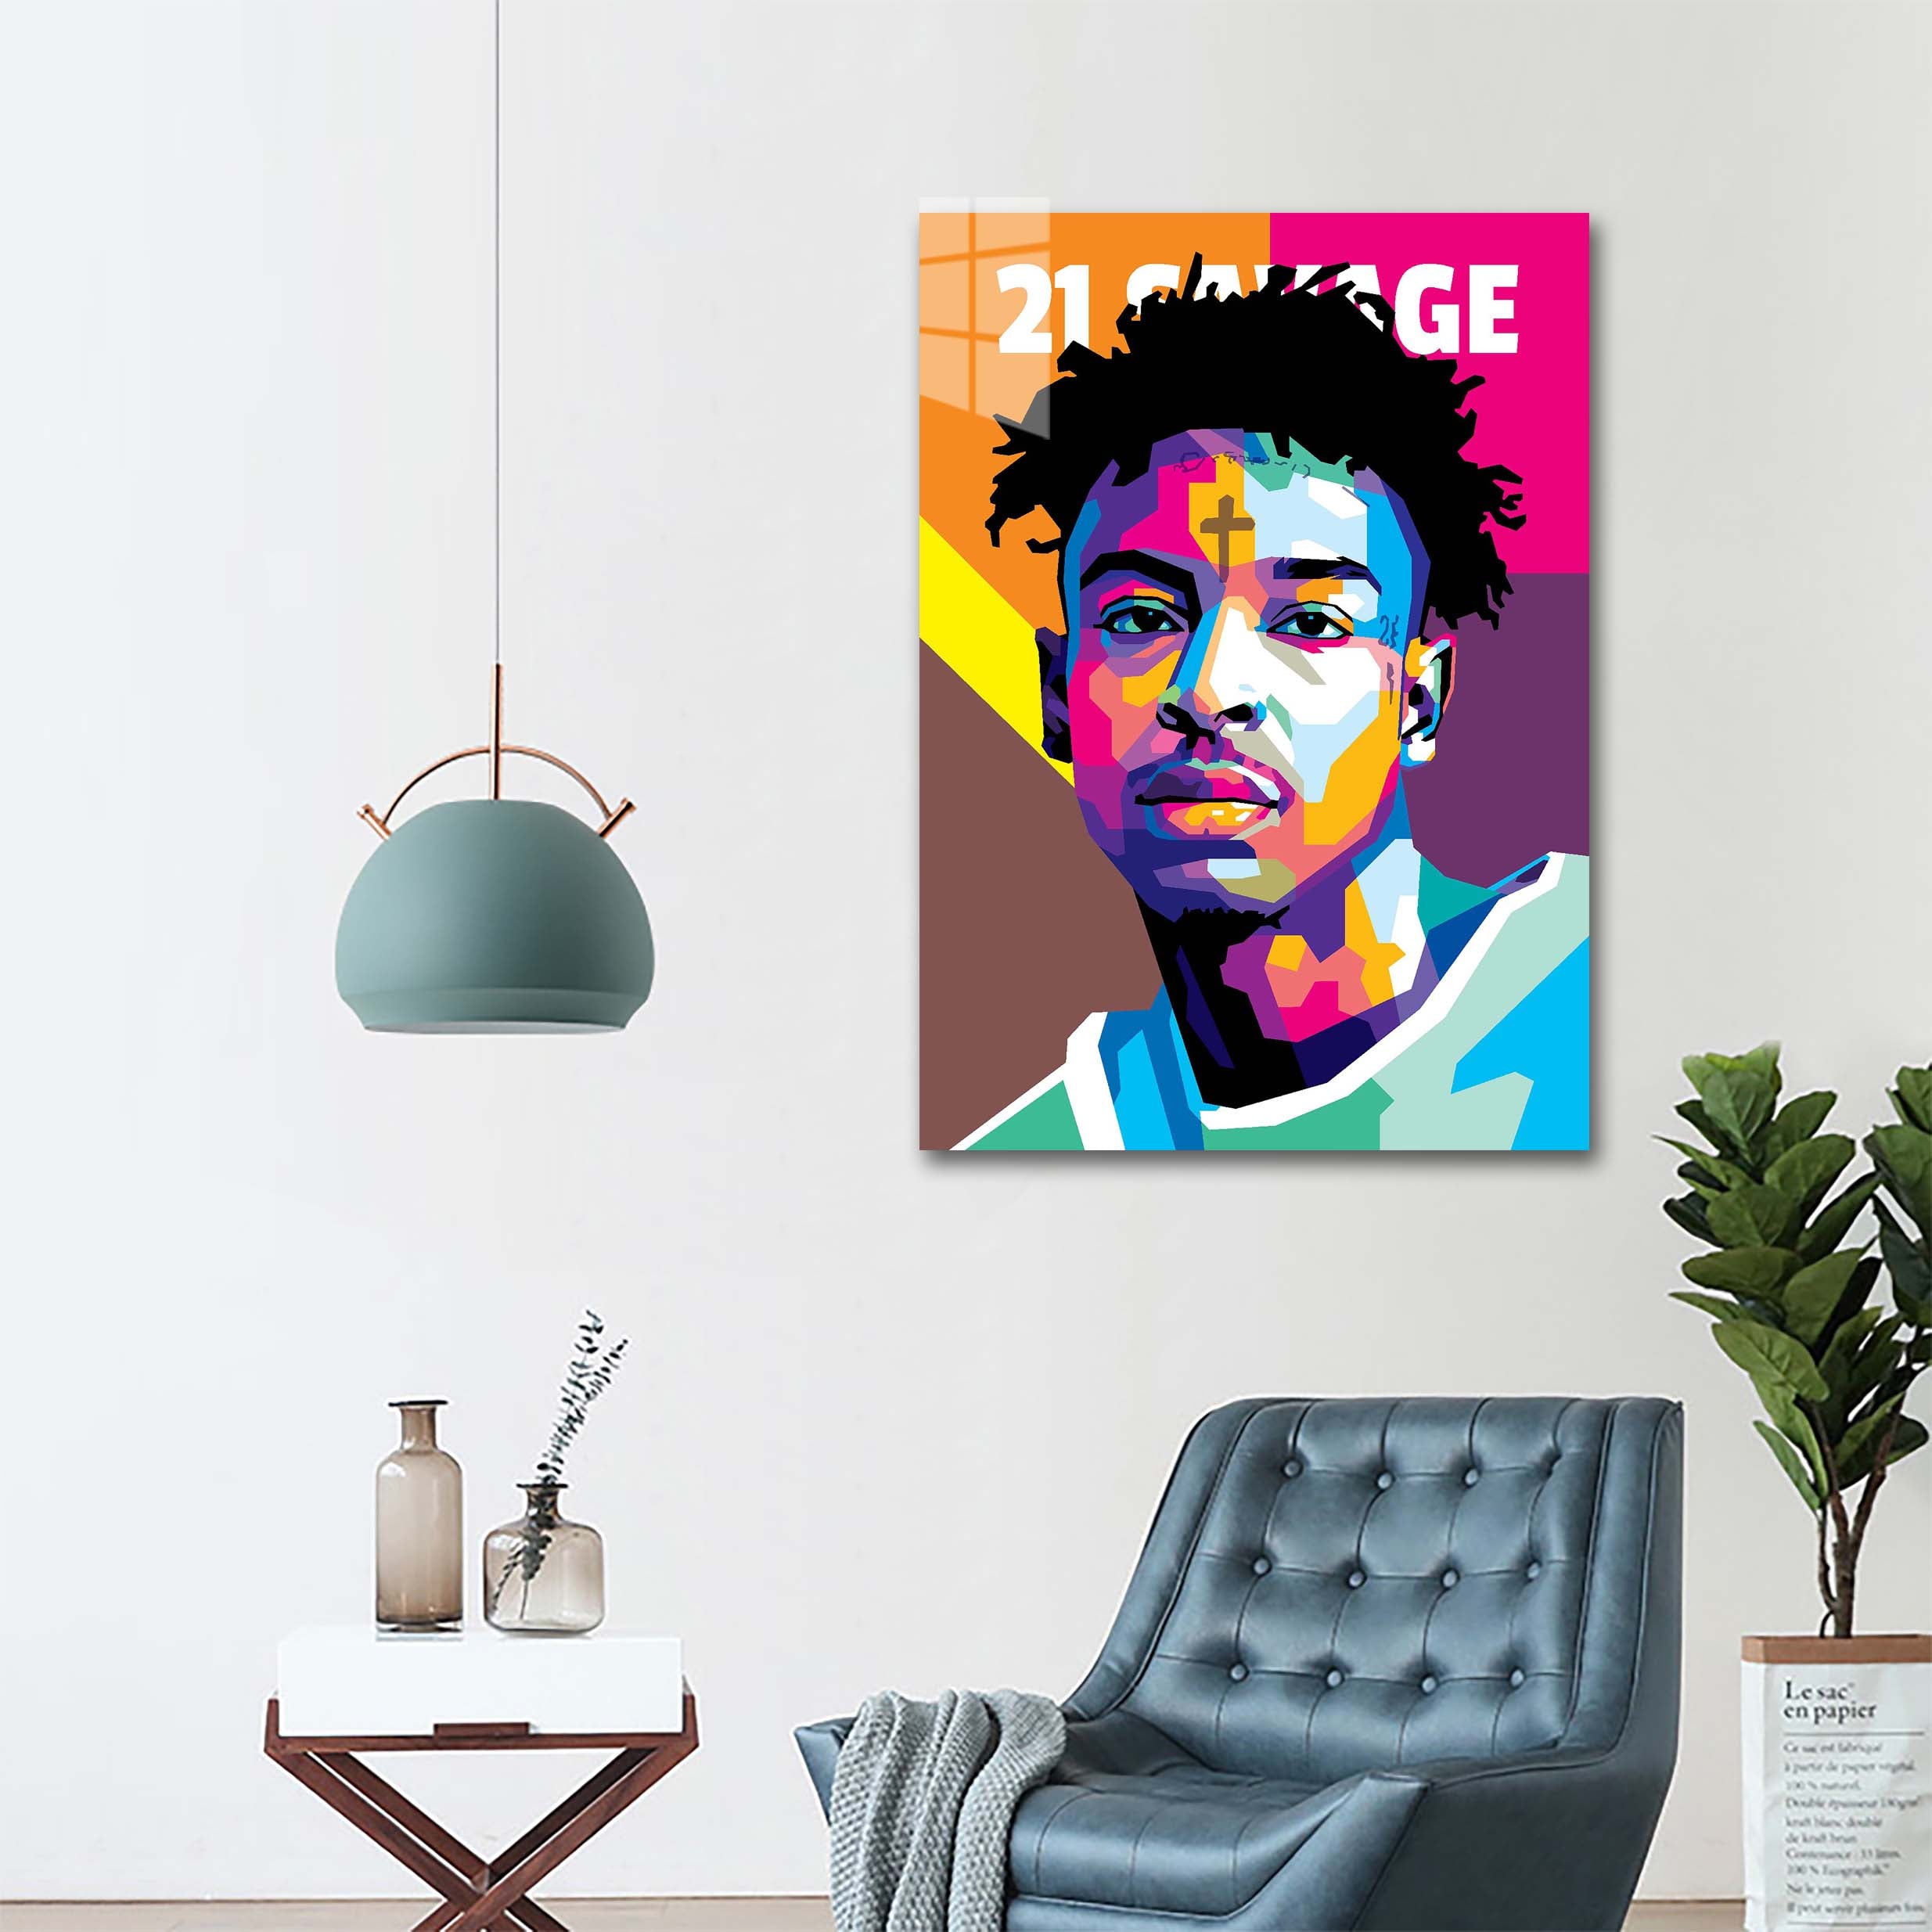 21 Savage in WPAP Style-designed by @V Styler